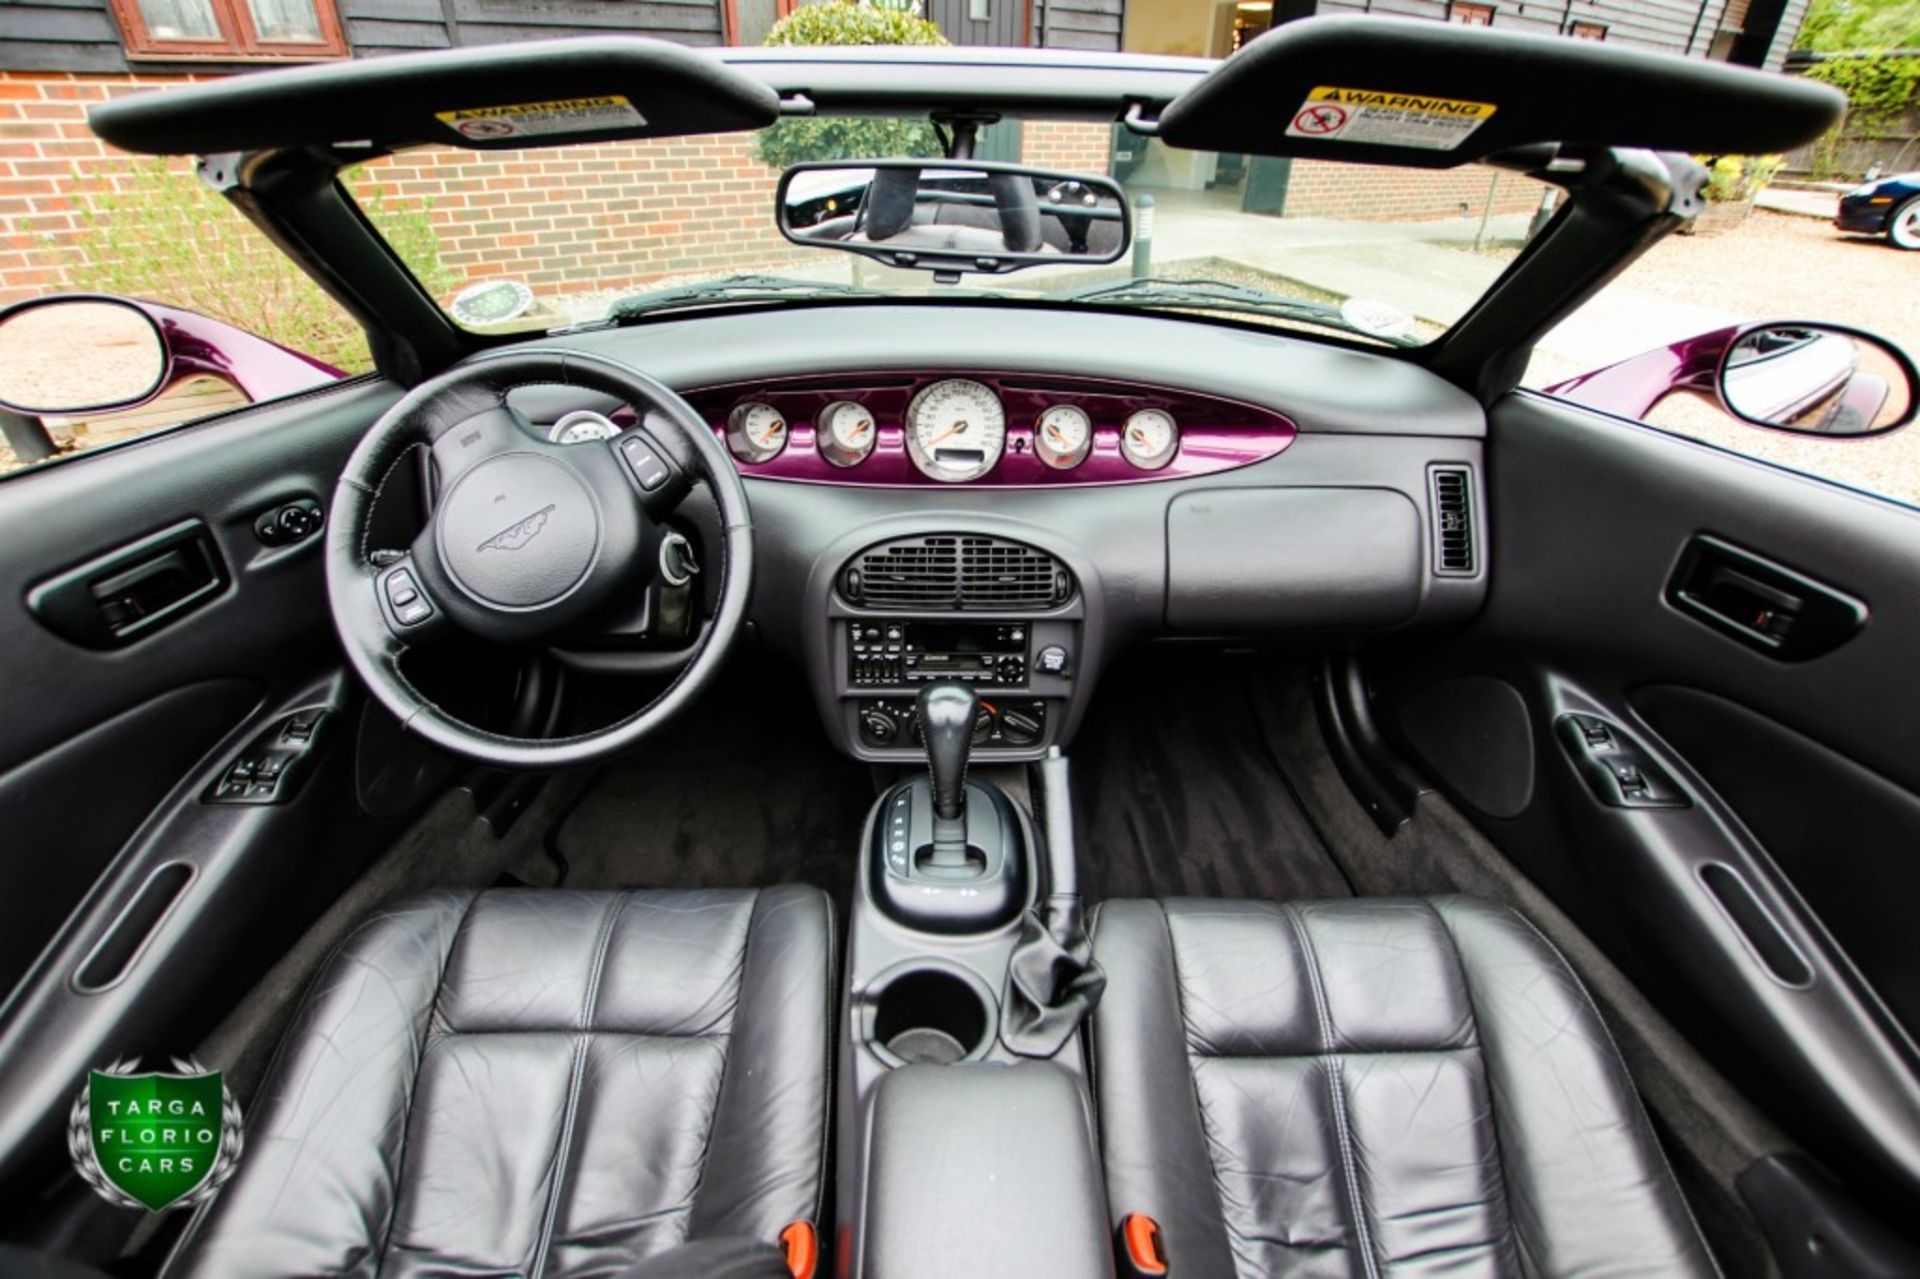 1998 CHRYSLER PLYMOUTH PROWLER V6 2 DOOR CONVERTIBLE, 3500cc PETROL ENGINE, AUTO *NO VAT* - Image 25 of 32